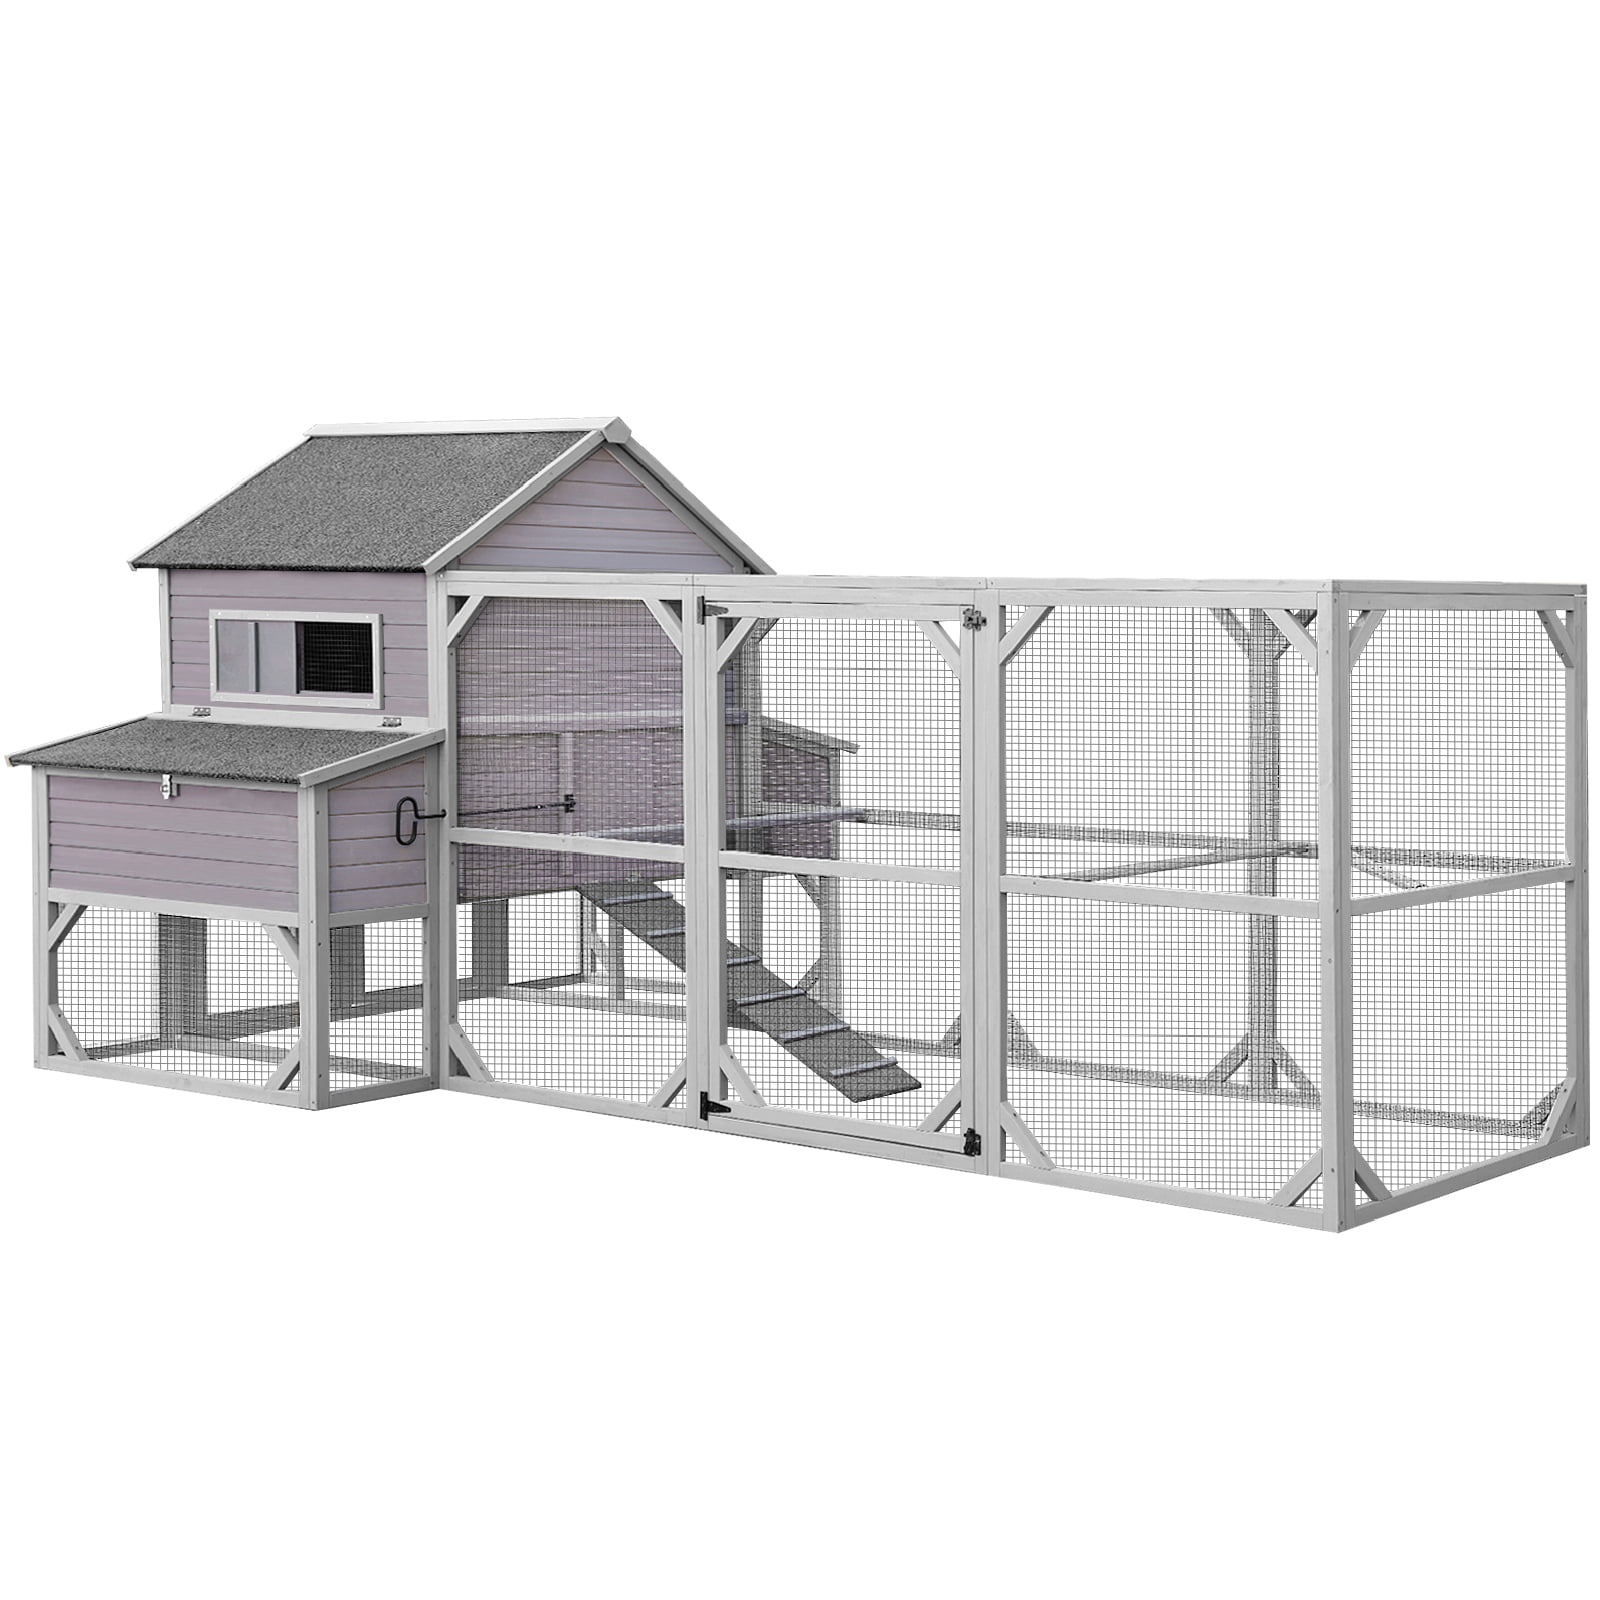 All 90+ Images chicken coop for 15-20 chickens Completed